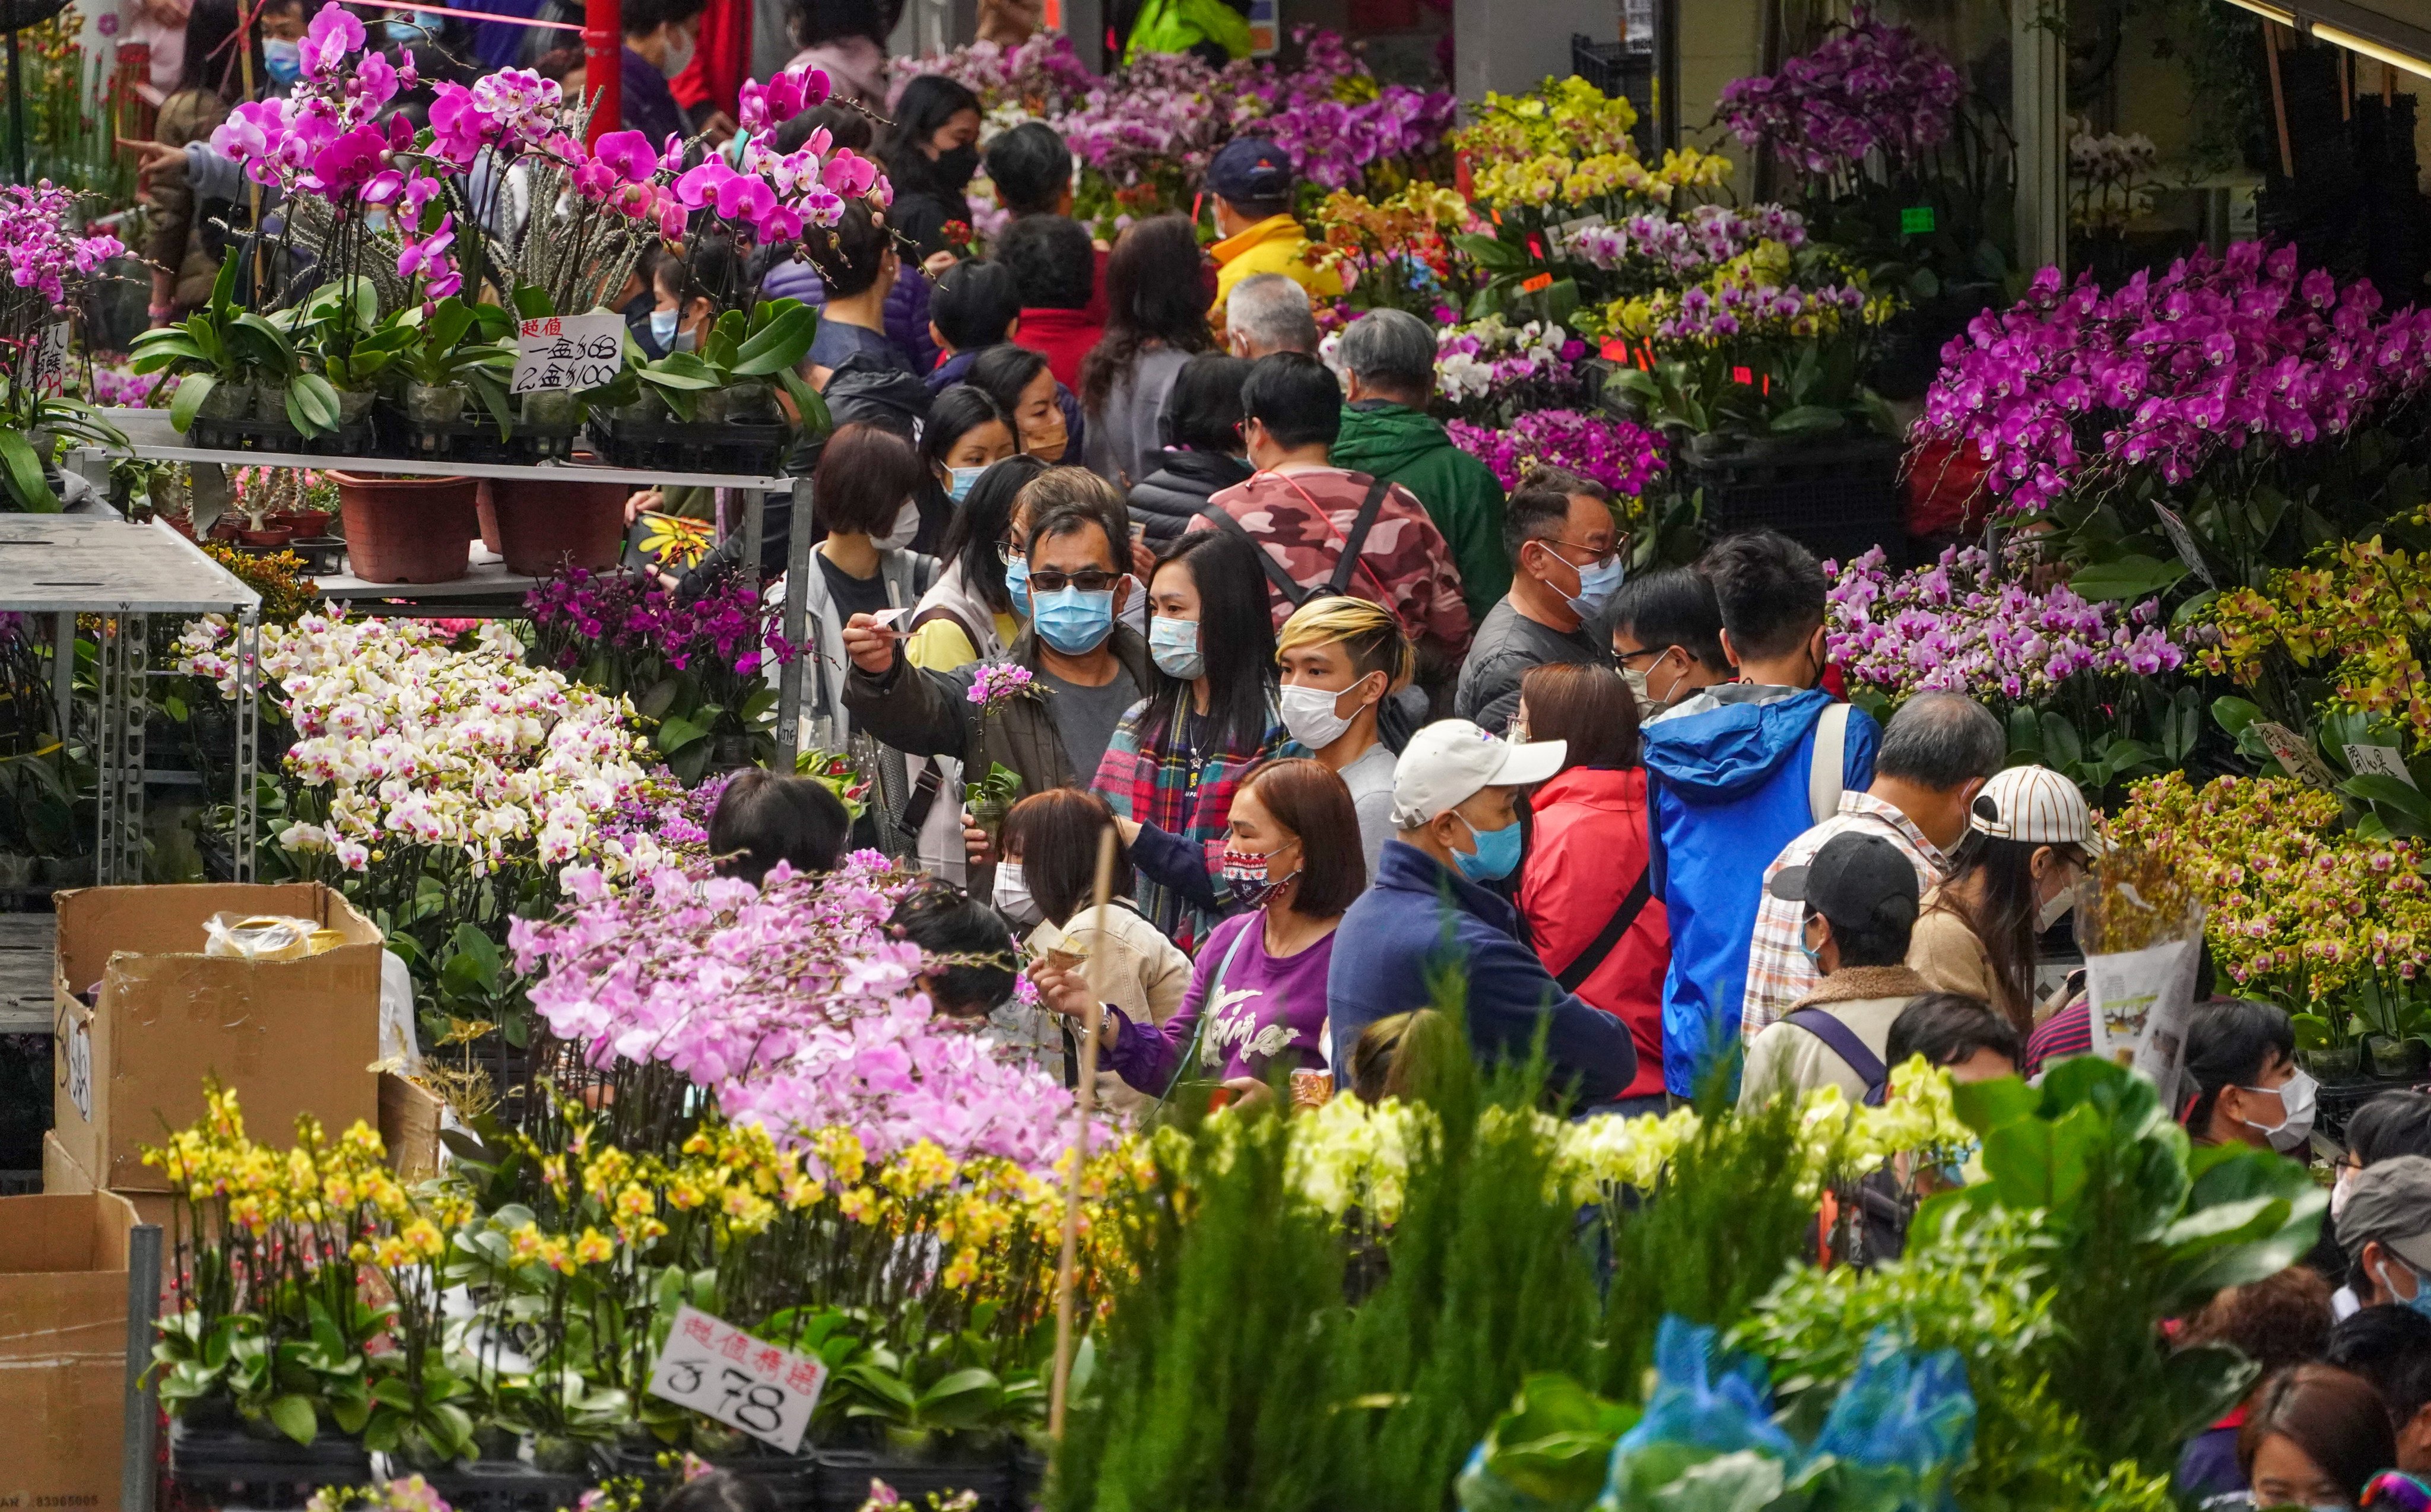 People flock to the Mong Kok Flower Market for Lunar New Year blooms. Photo: Felix Wong